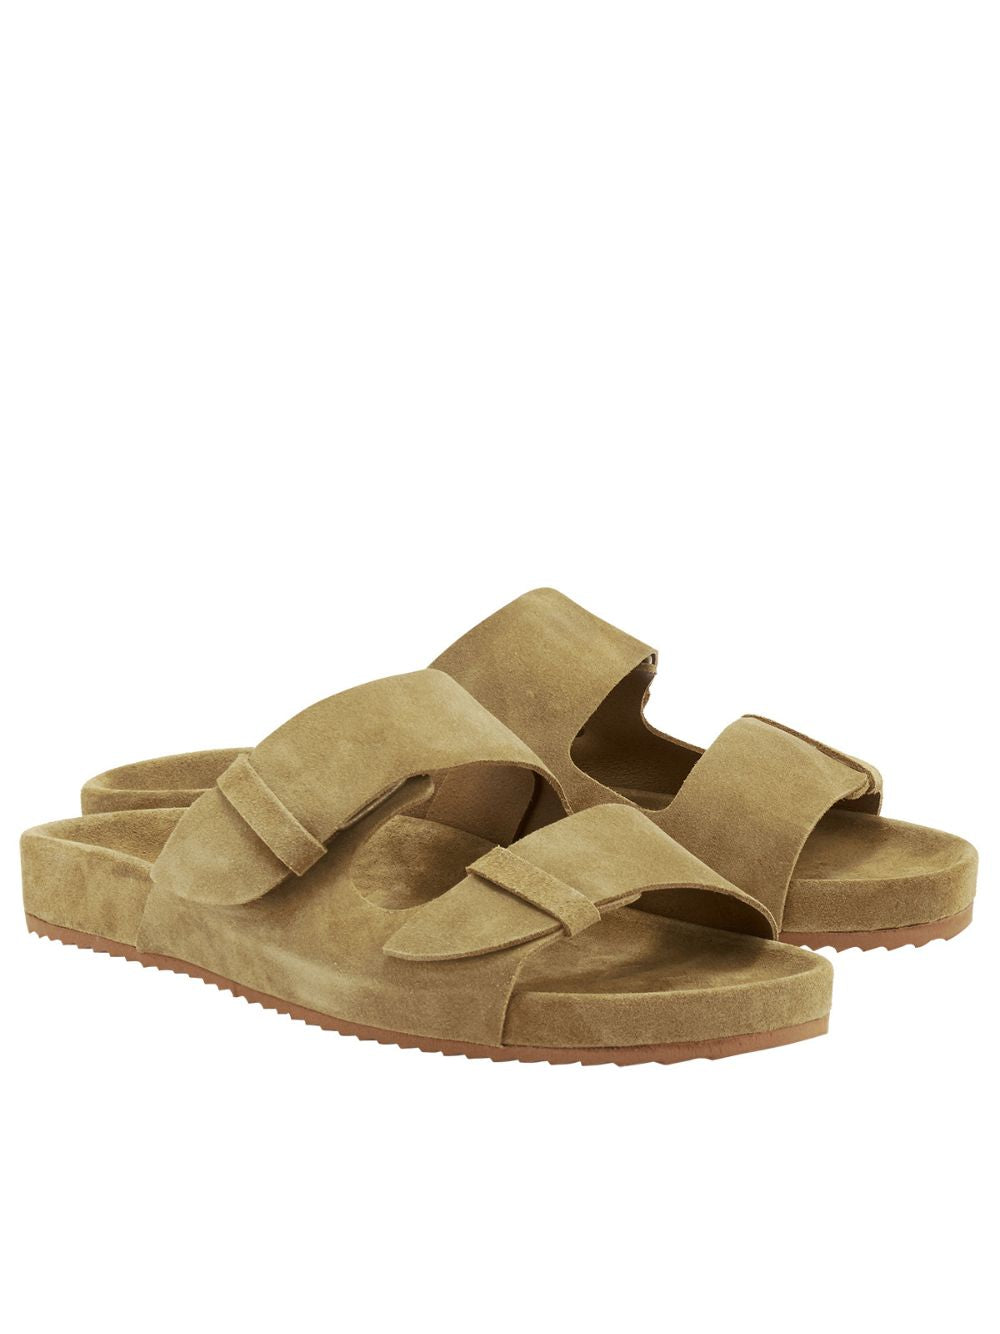 Diogenis Sandals